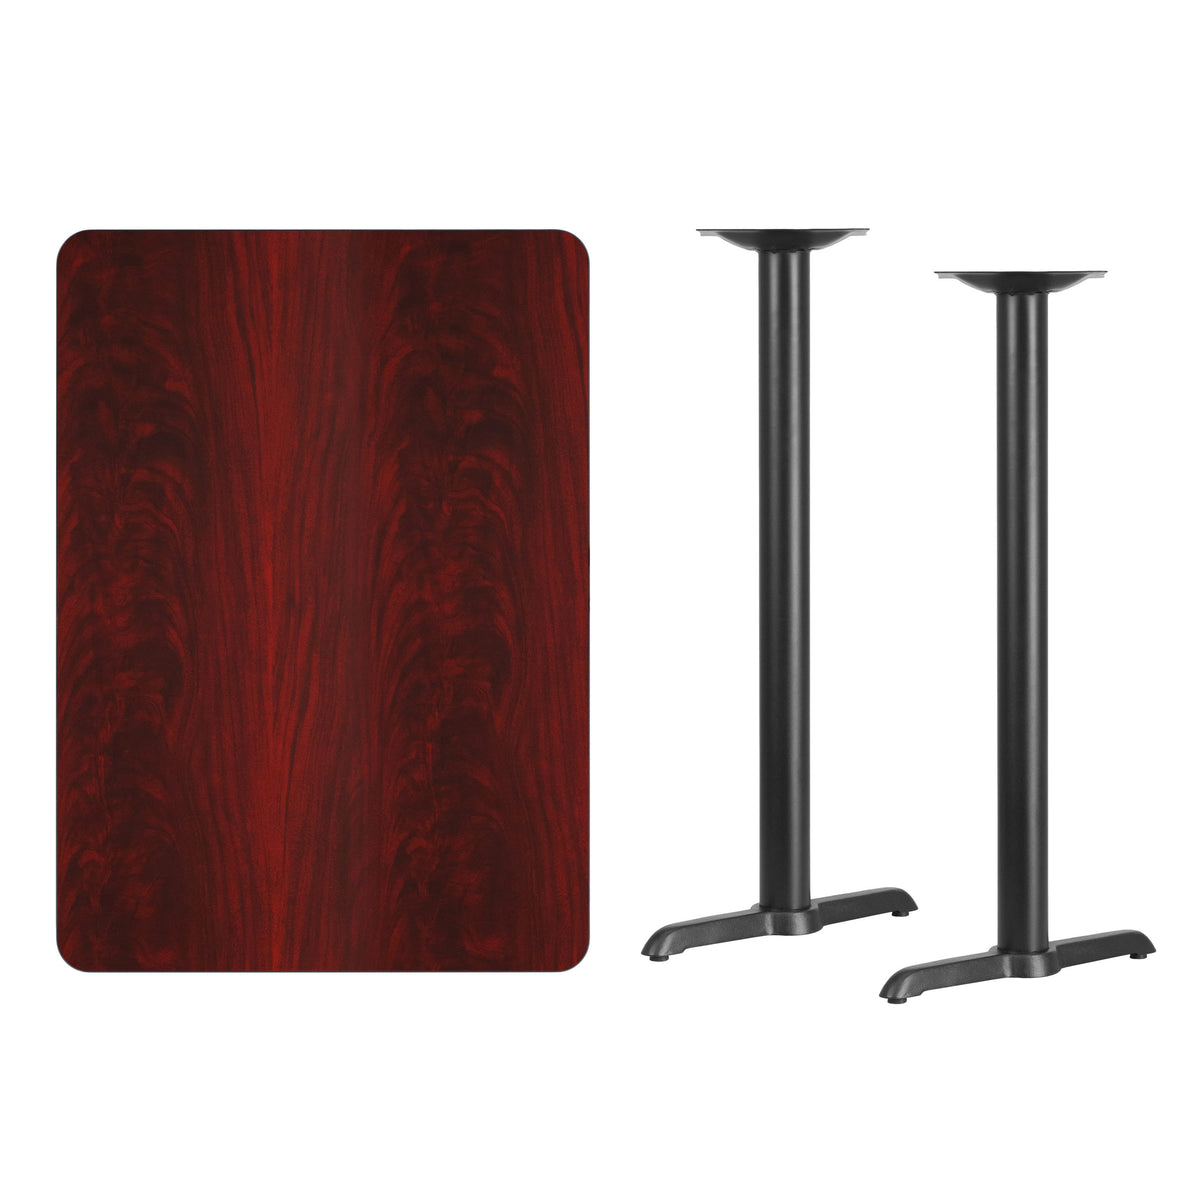 Mahogany |#| 30inch x 42inch Mahogany Laminate Table Top with 5inch x 22inch Bar Height Table Bases